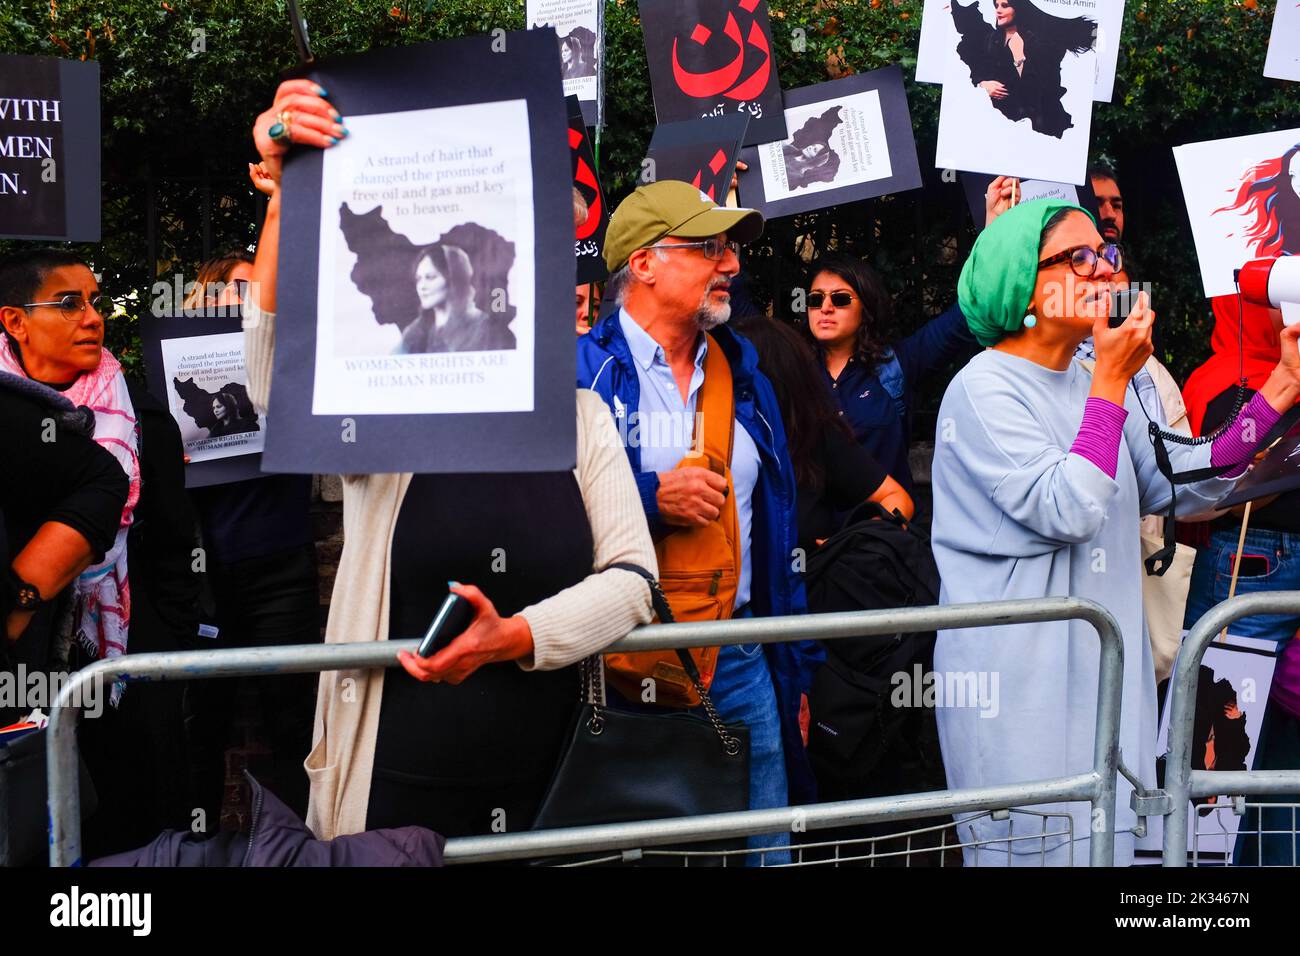 People protest against Iran’s strict laws in Iranian embassy London uk , after the death of Mahsa Amini  uk Iranian community demonstration . Stock Photo